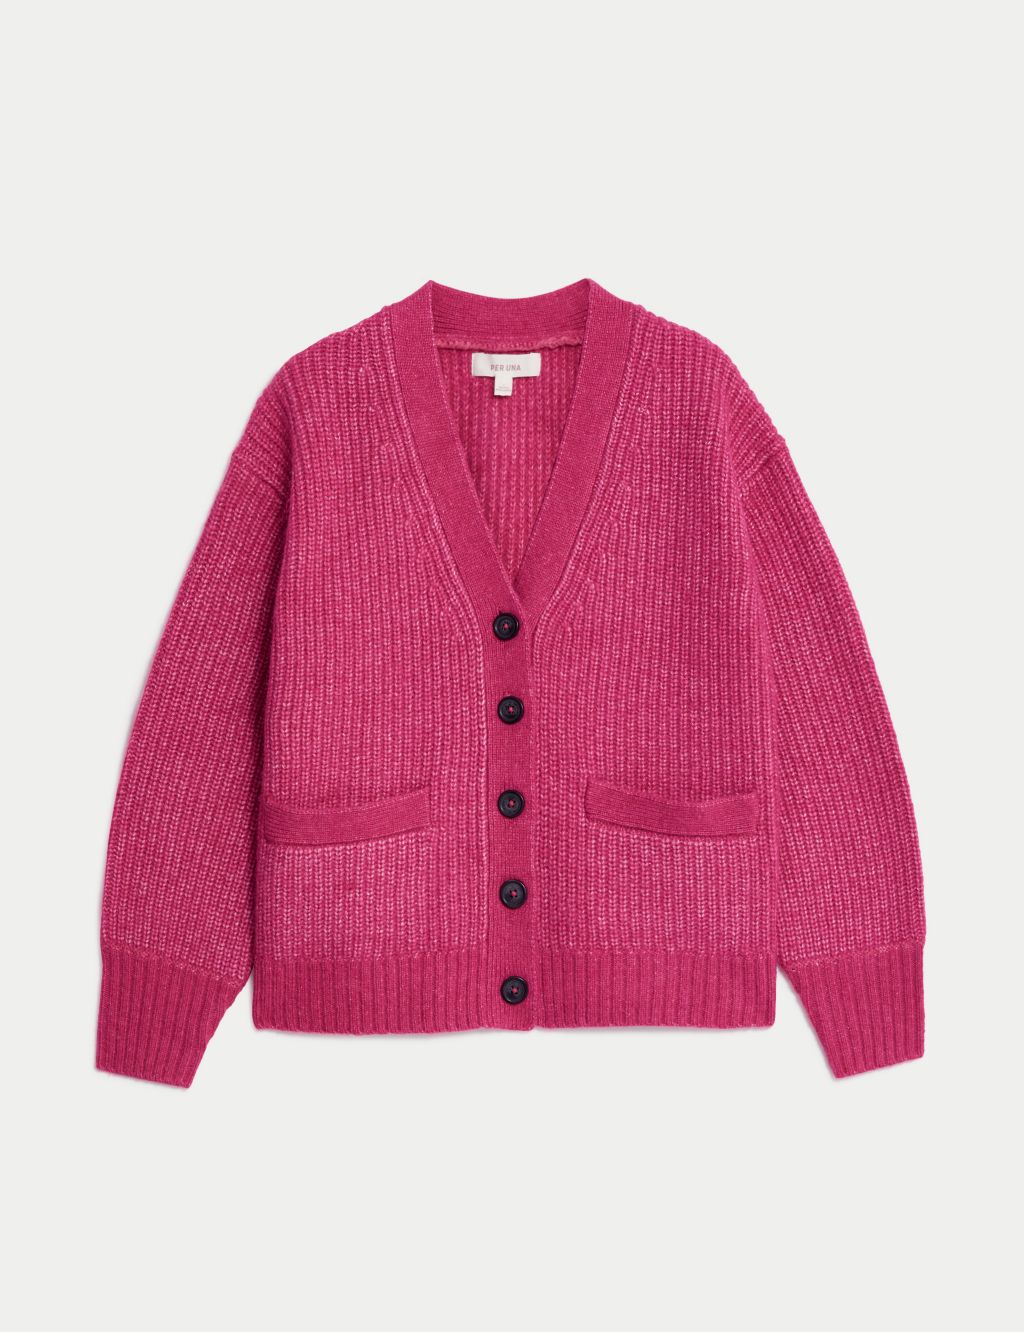 Knitted V-Neck Relaxed Cardigan with Wool image 2